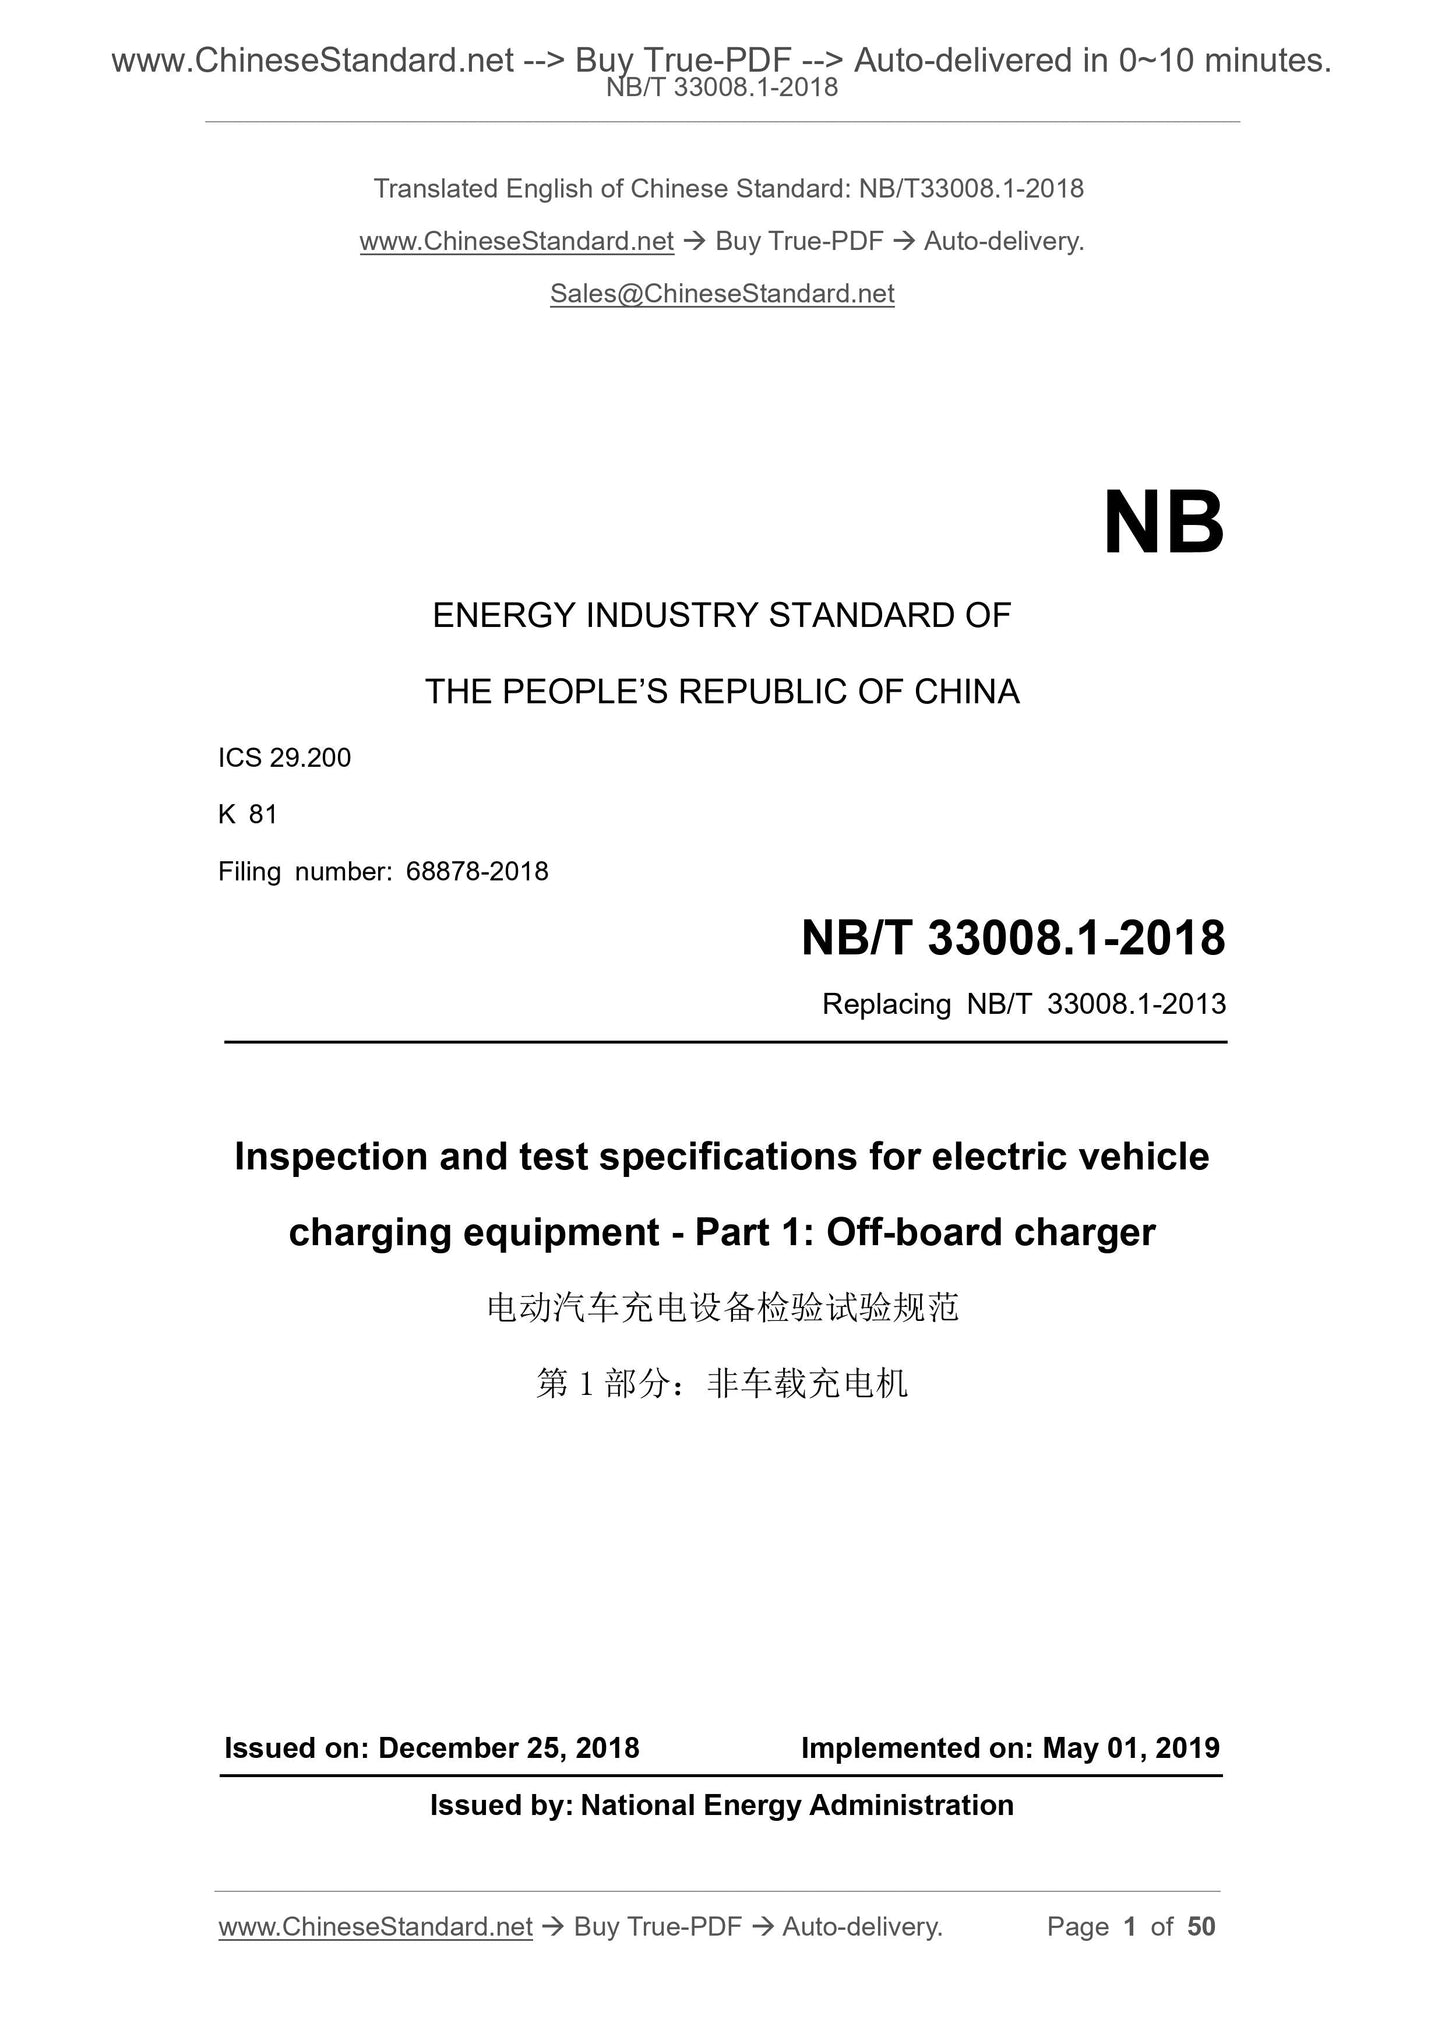 NB/T 33008.1-2018 Page 1